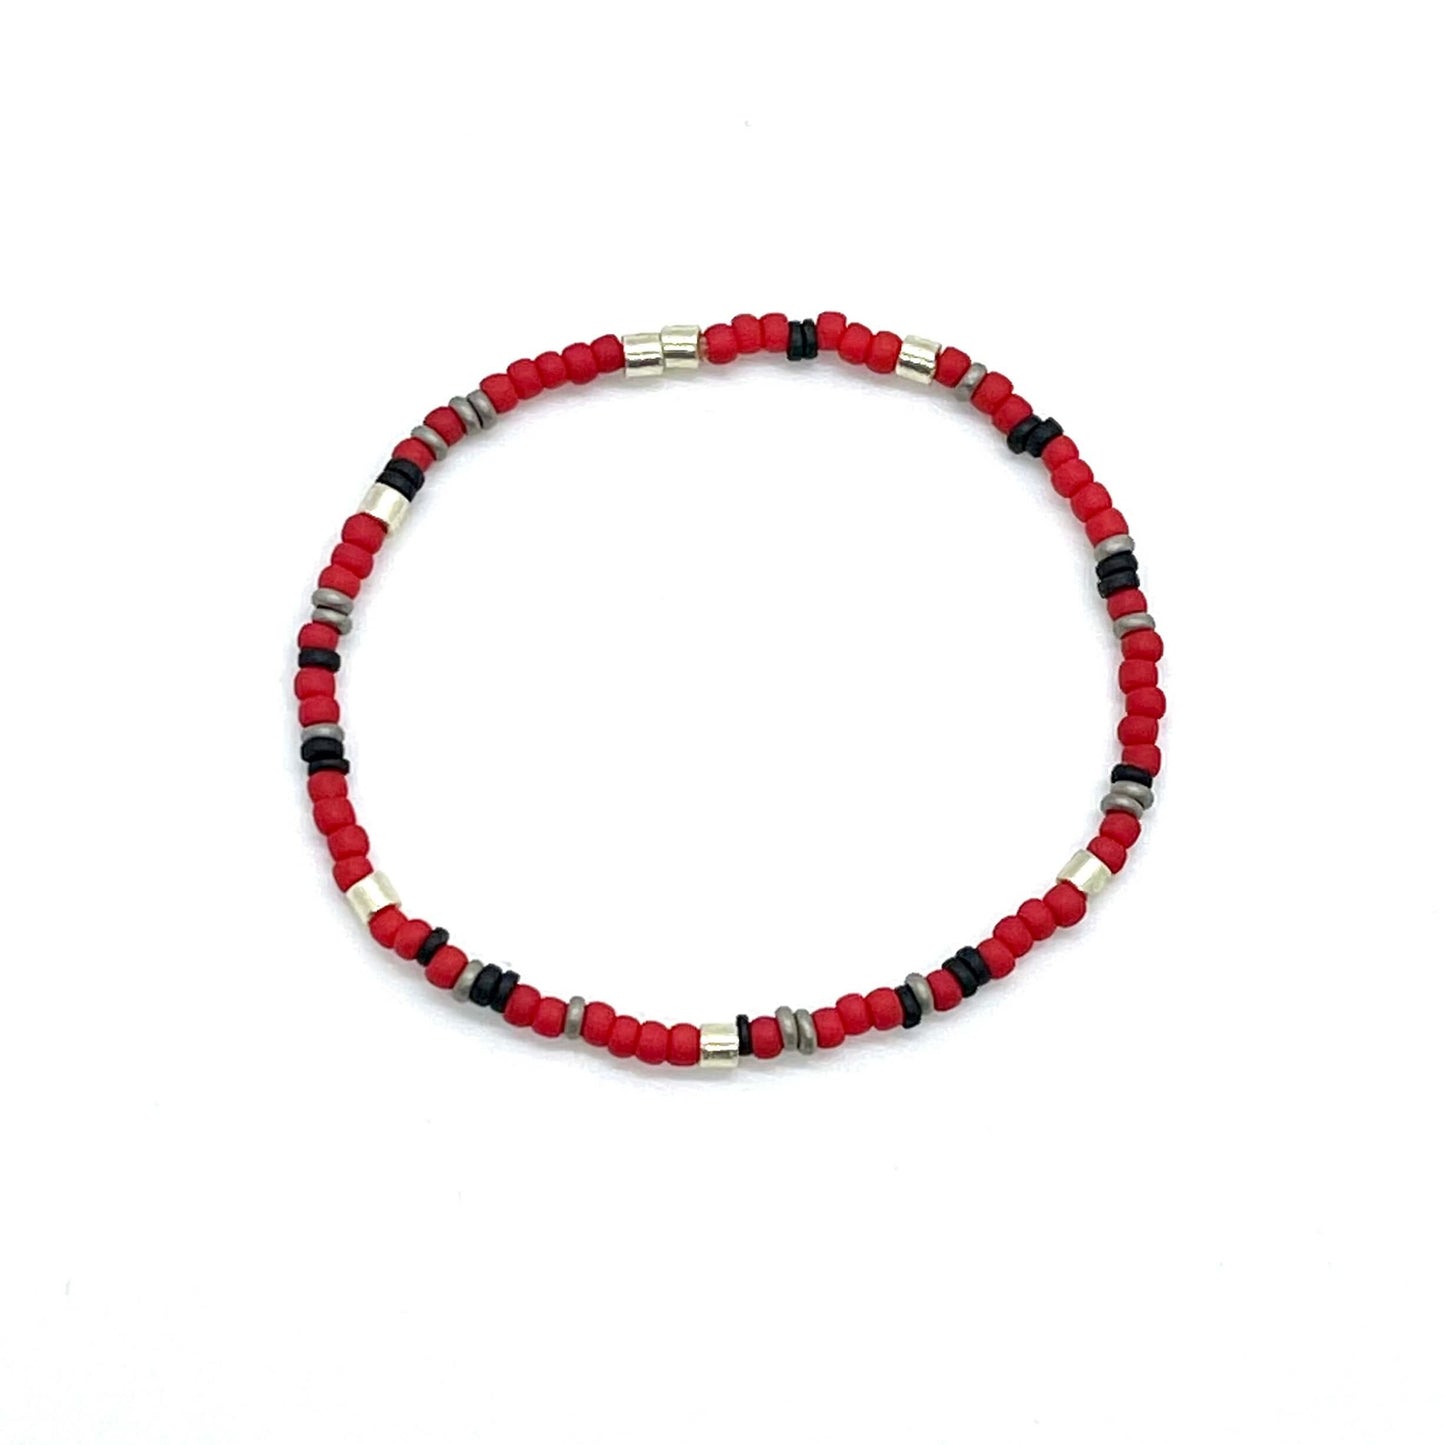 Red seed bead skinny stretch bracelet for guys with black and silver accent beads.